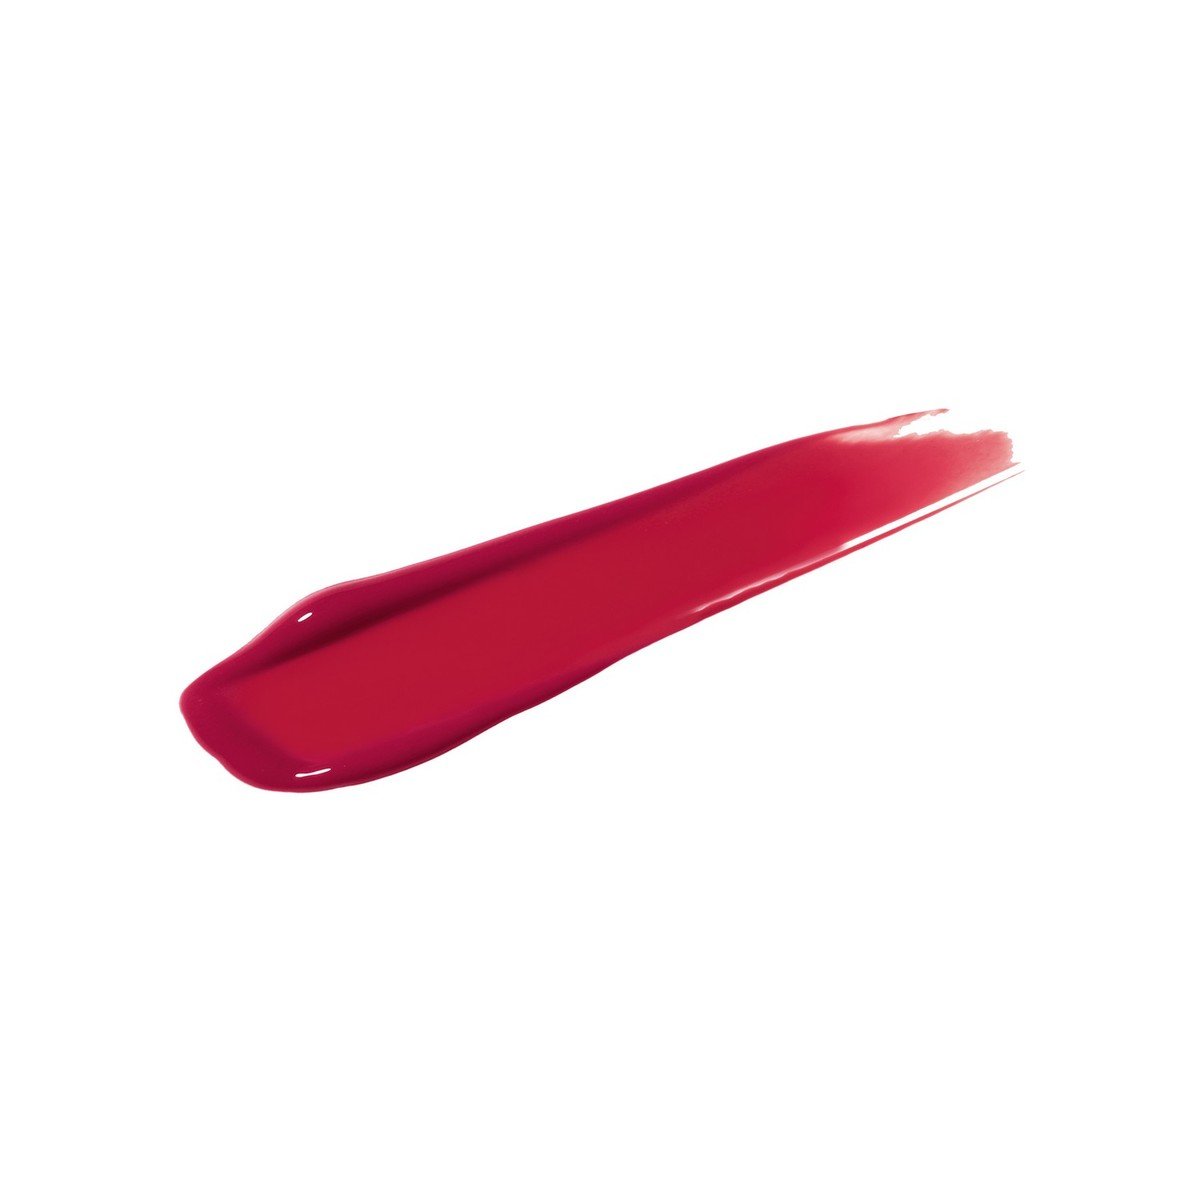 Rimmel London Provocalips 16Hr Kissproof Lip Colour - Play With Fire 1pc